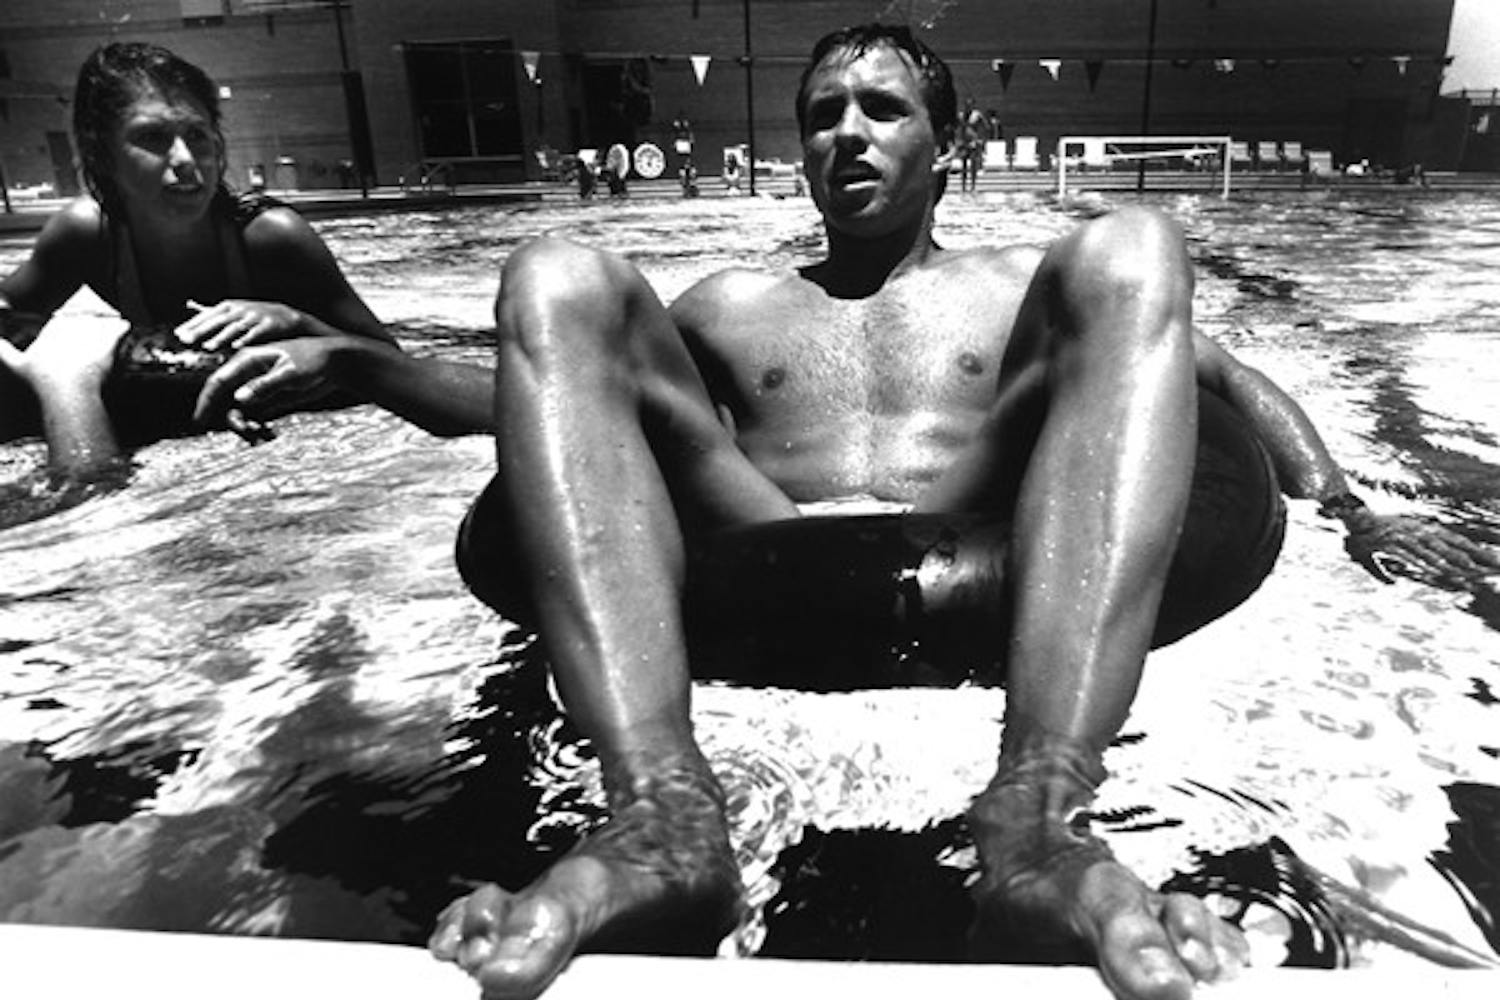 TUBE TEACHERS: Seniors Brad Senska and Michelle Danko prepare for their inner tube relay race at the Student Recreation Center pool on June 20, 1990.  Students in the summer physical education were required to teach one game to other students. (Photo by T.J. Sokol)